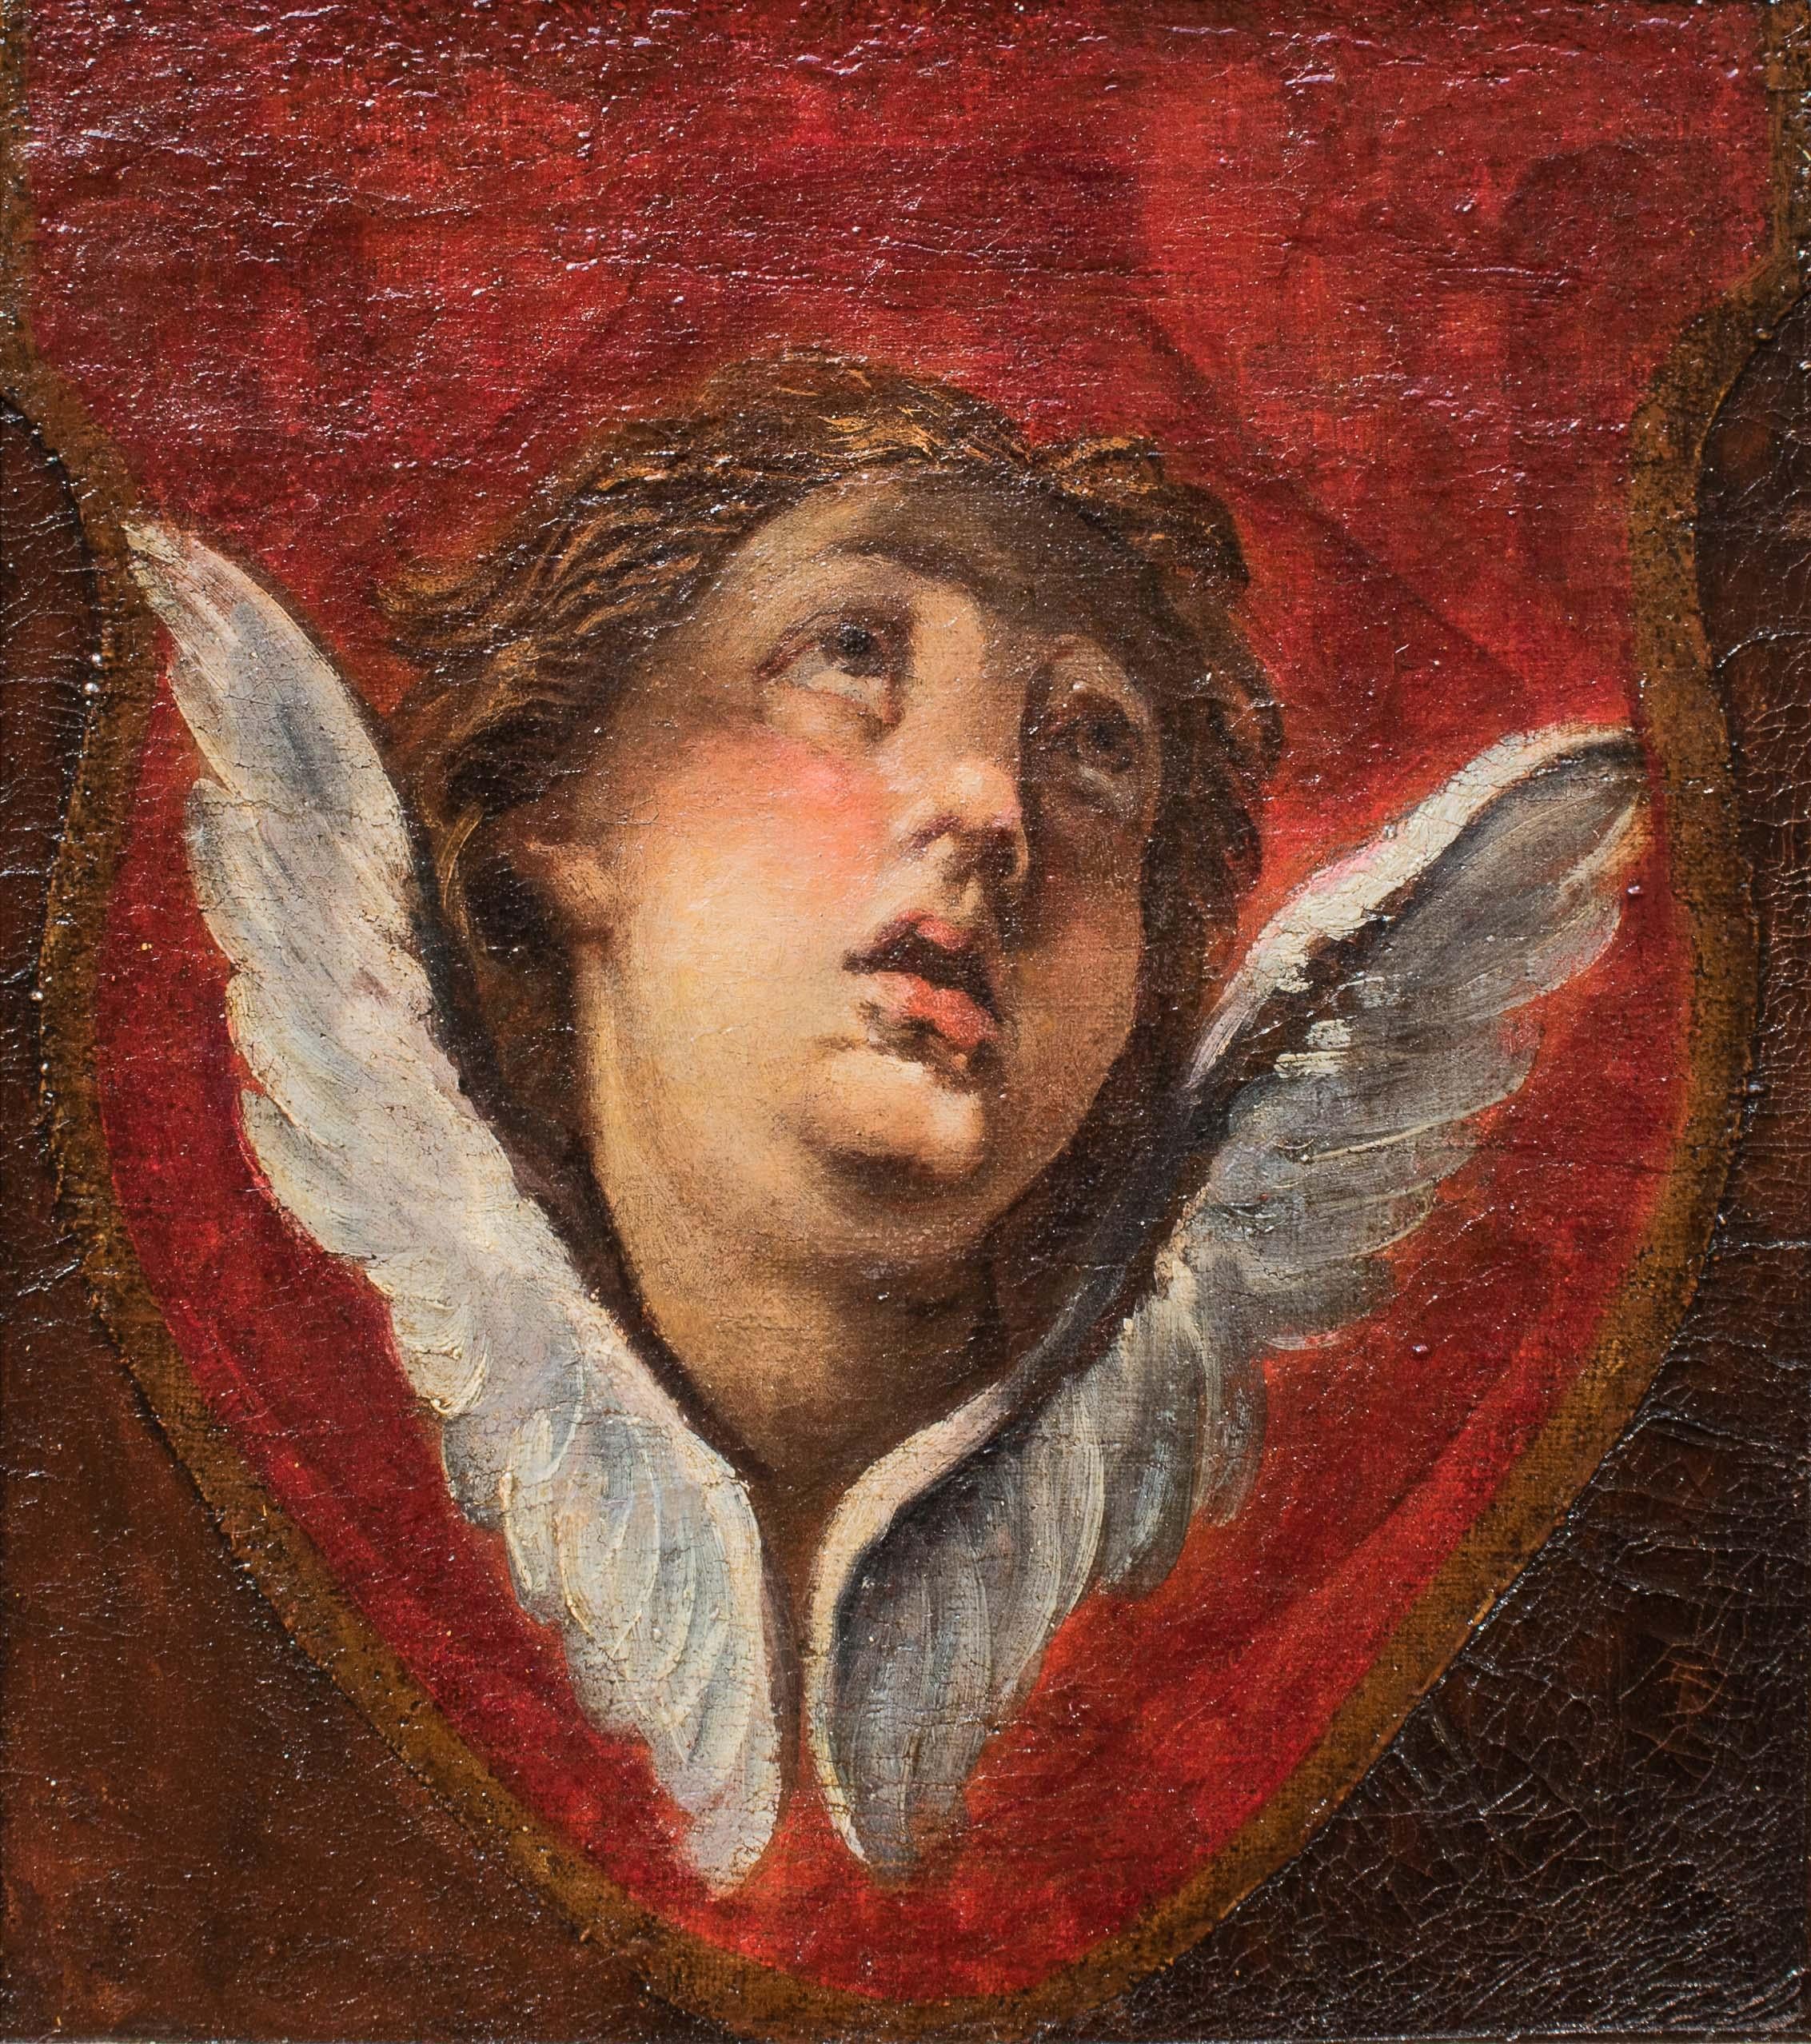 Venetian school, 18th century
Study with the head of a cherub
Measures: Oil on canvas, 45.5 x 41 cm - with frame 54.5 x 49.5 cm

The present qualifies as a study or preparatory sketch by virtue of the structural and figural layout; by reason of